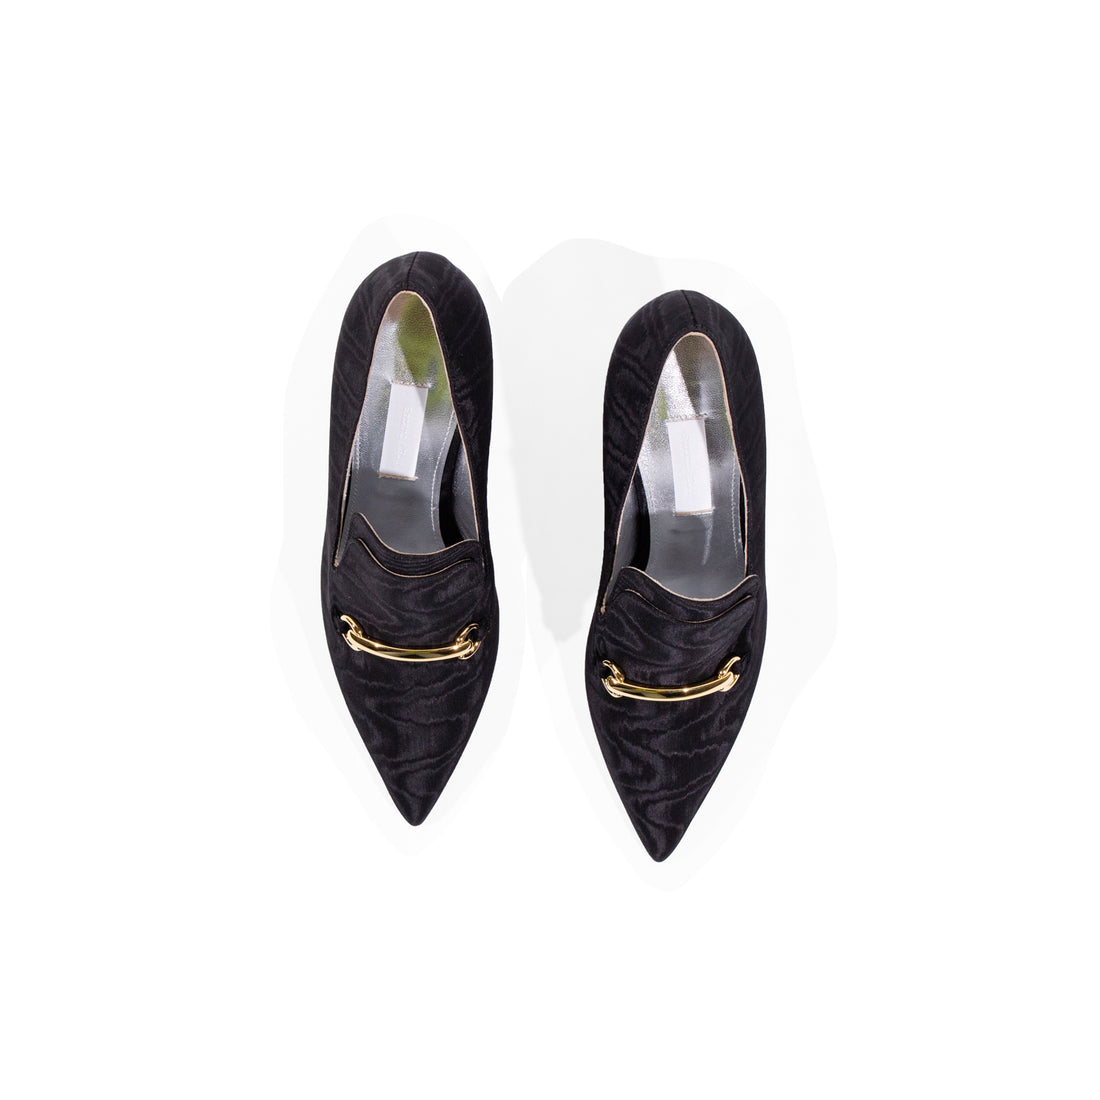 Suzanne Rae Blixen Lady Loafer in Black